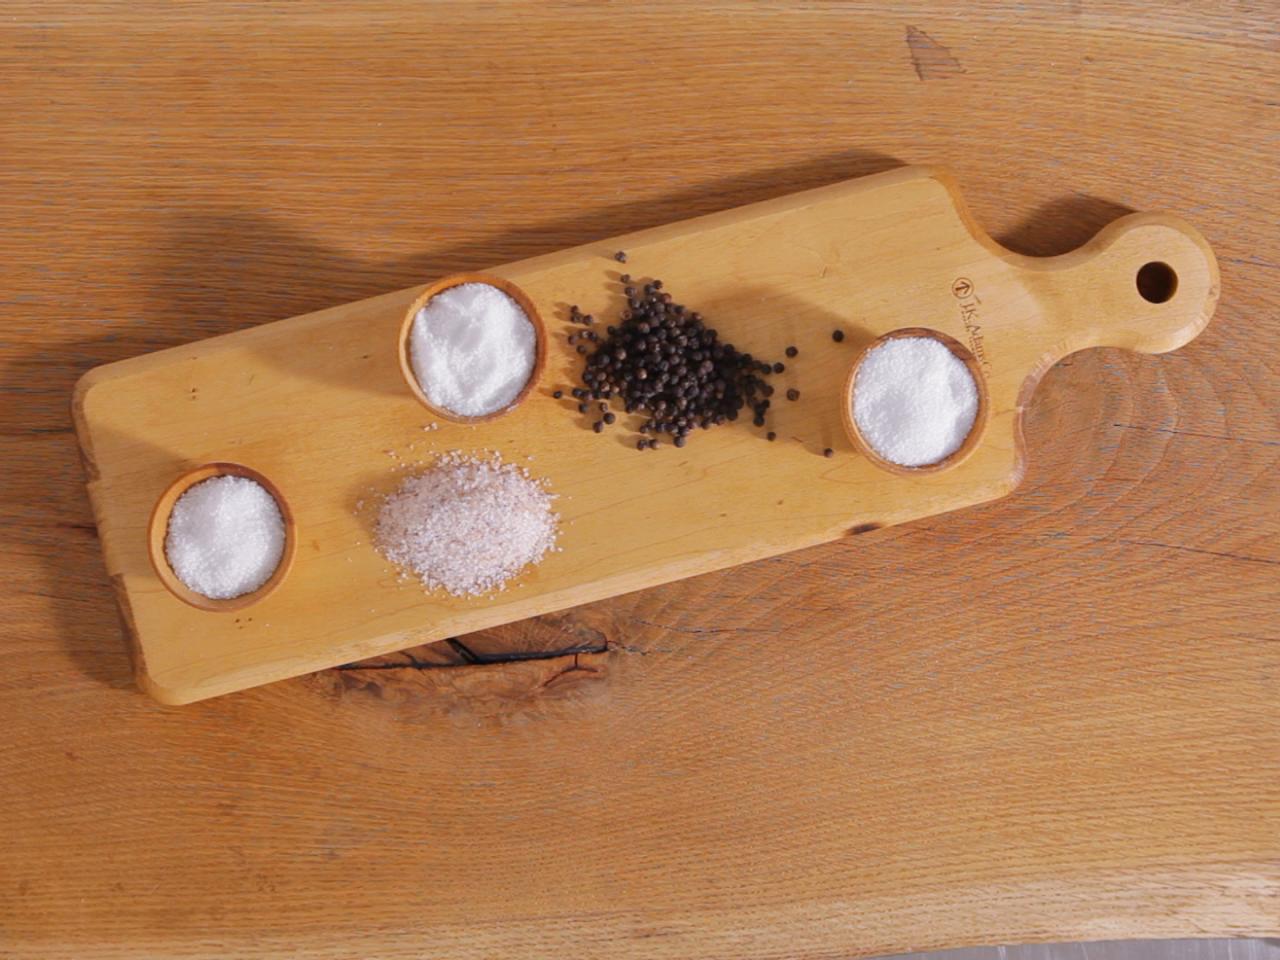 Seasoning Mistakes: How to Use Salt and Pepper Properly